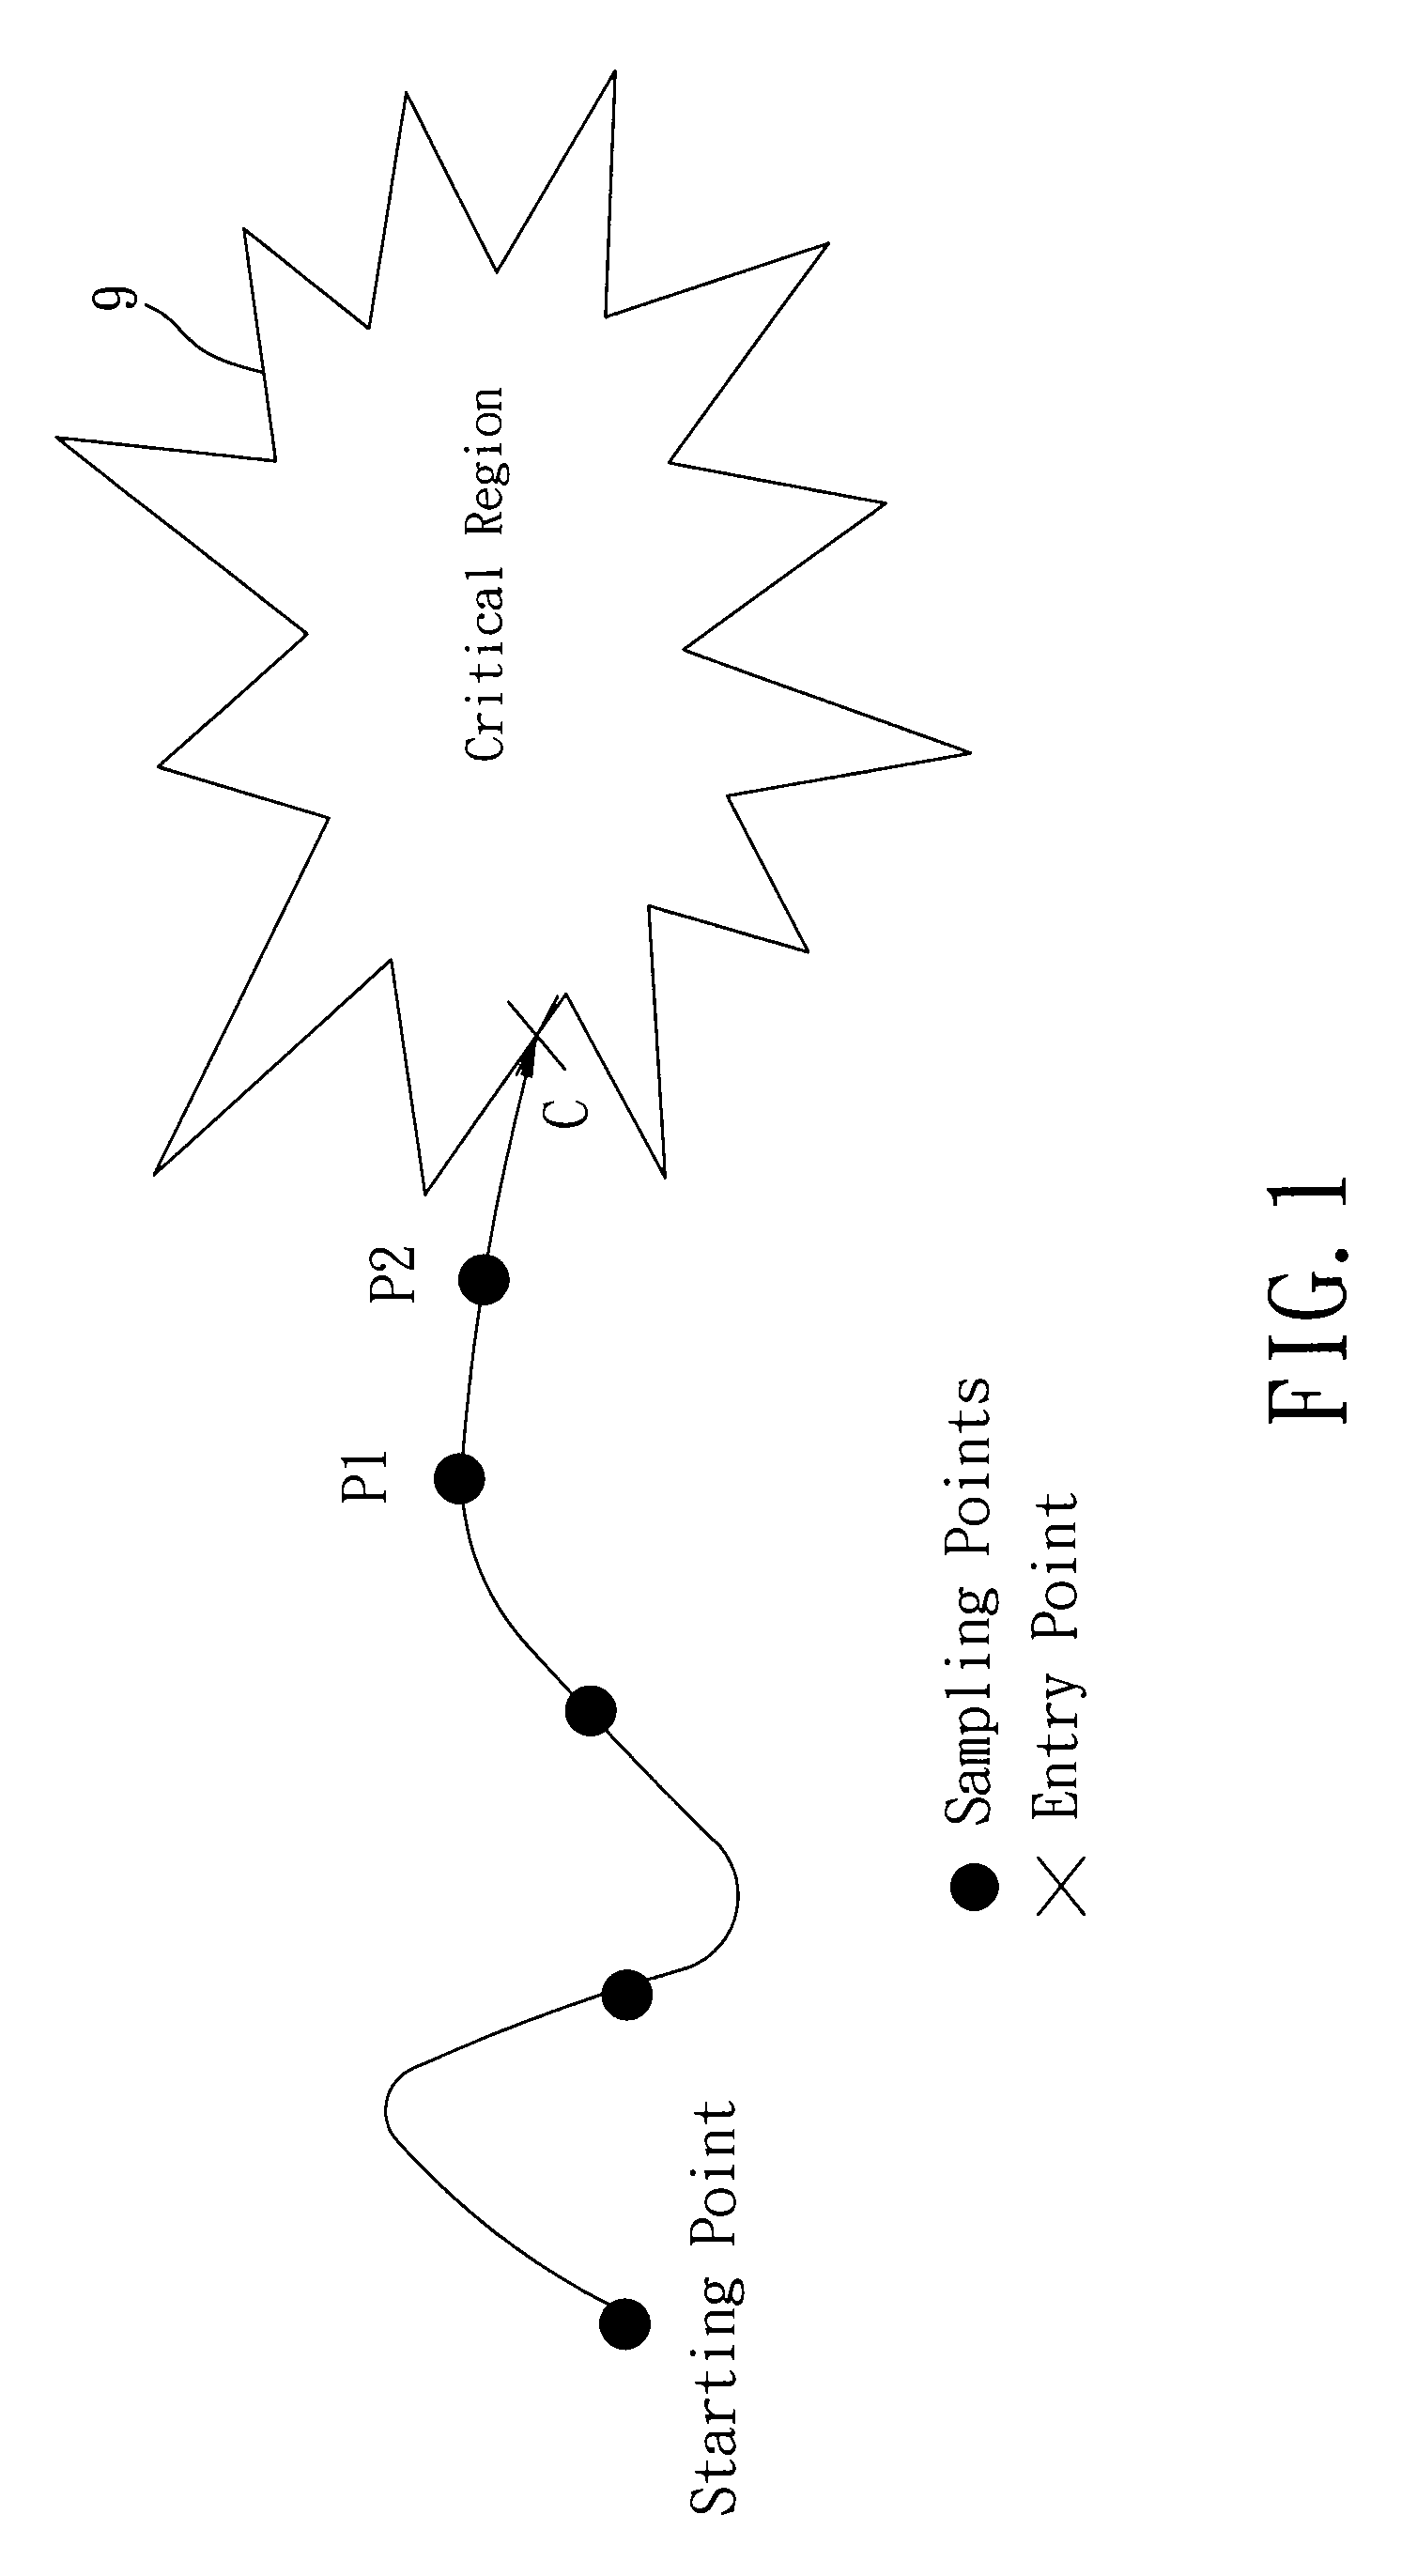 Method of reducing power consumption of a radio badge in a boundary detection localization system